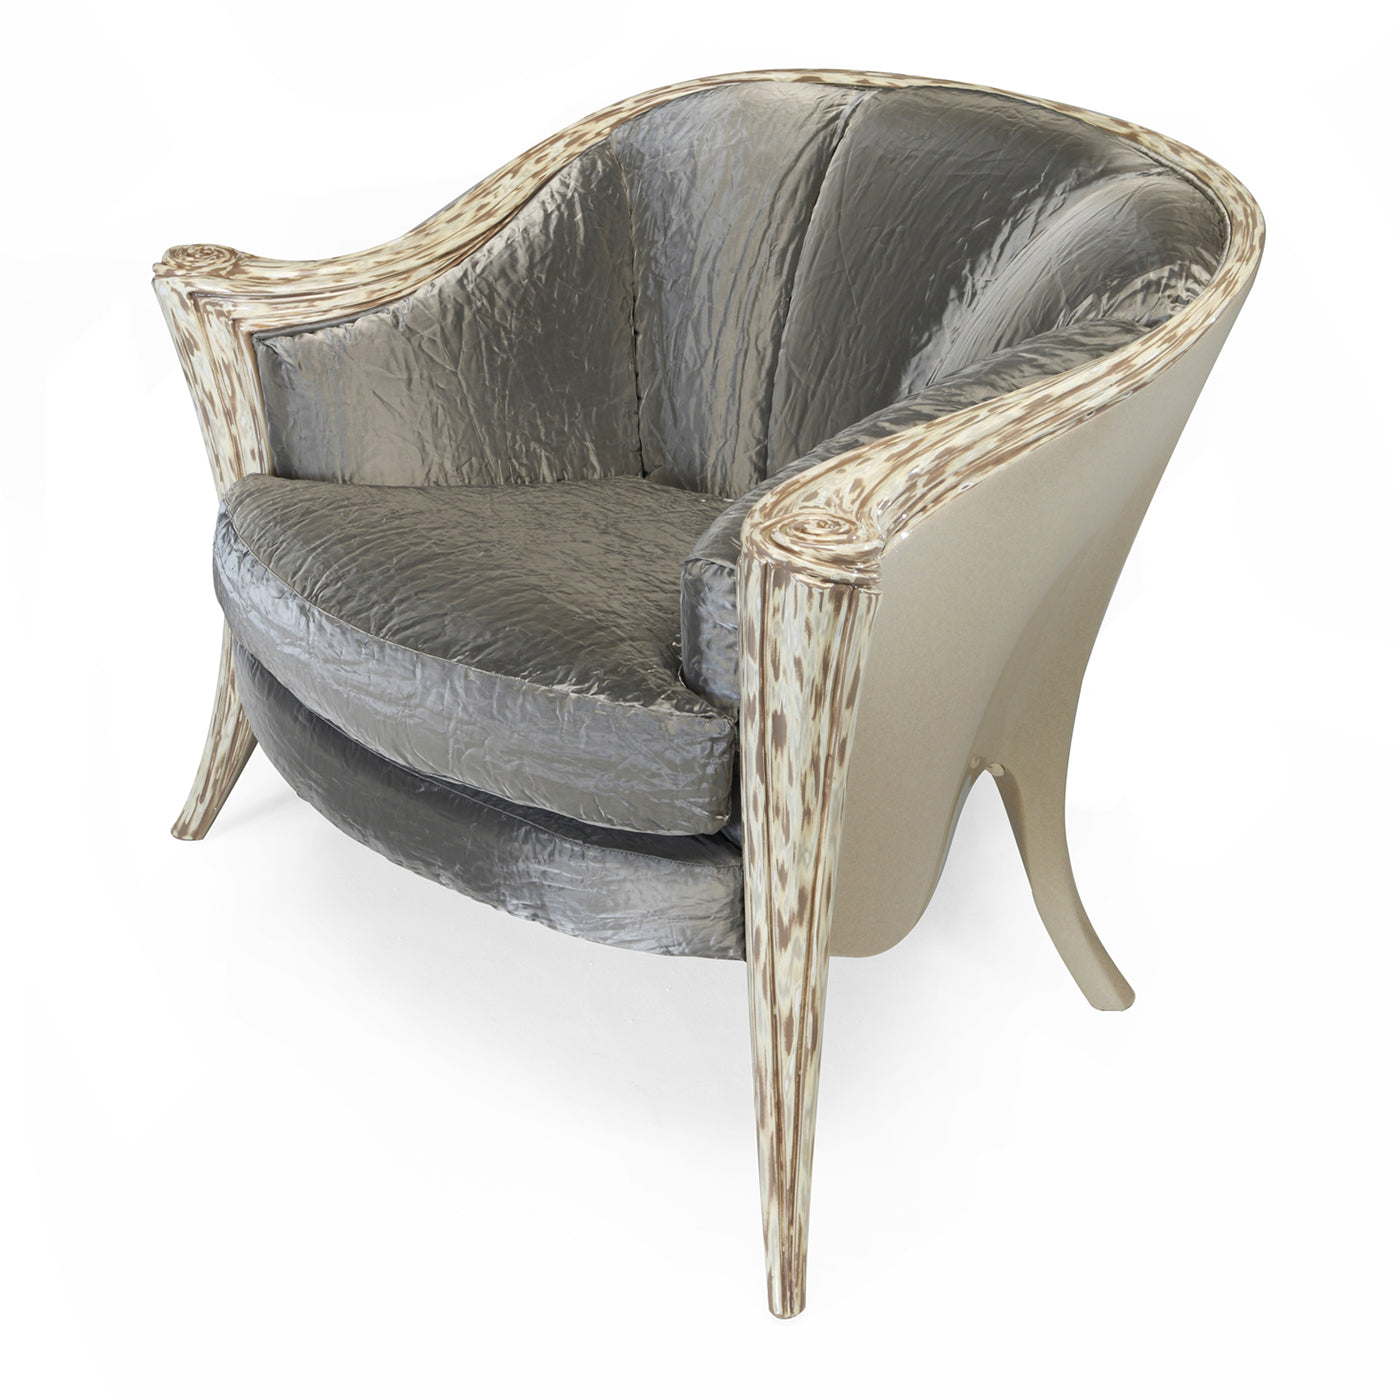 Opus Futura Upholstered Armchair Gray by Carlo Rampazzi - Alternative view 2